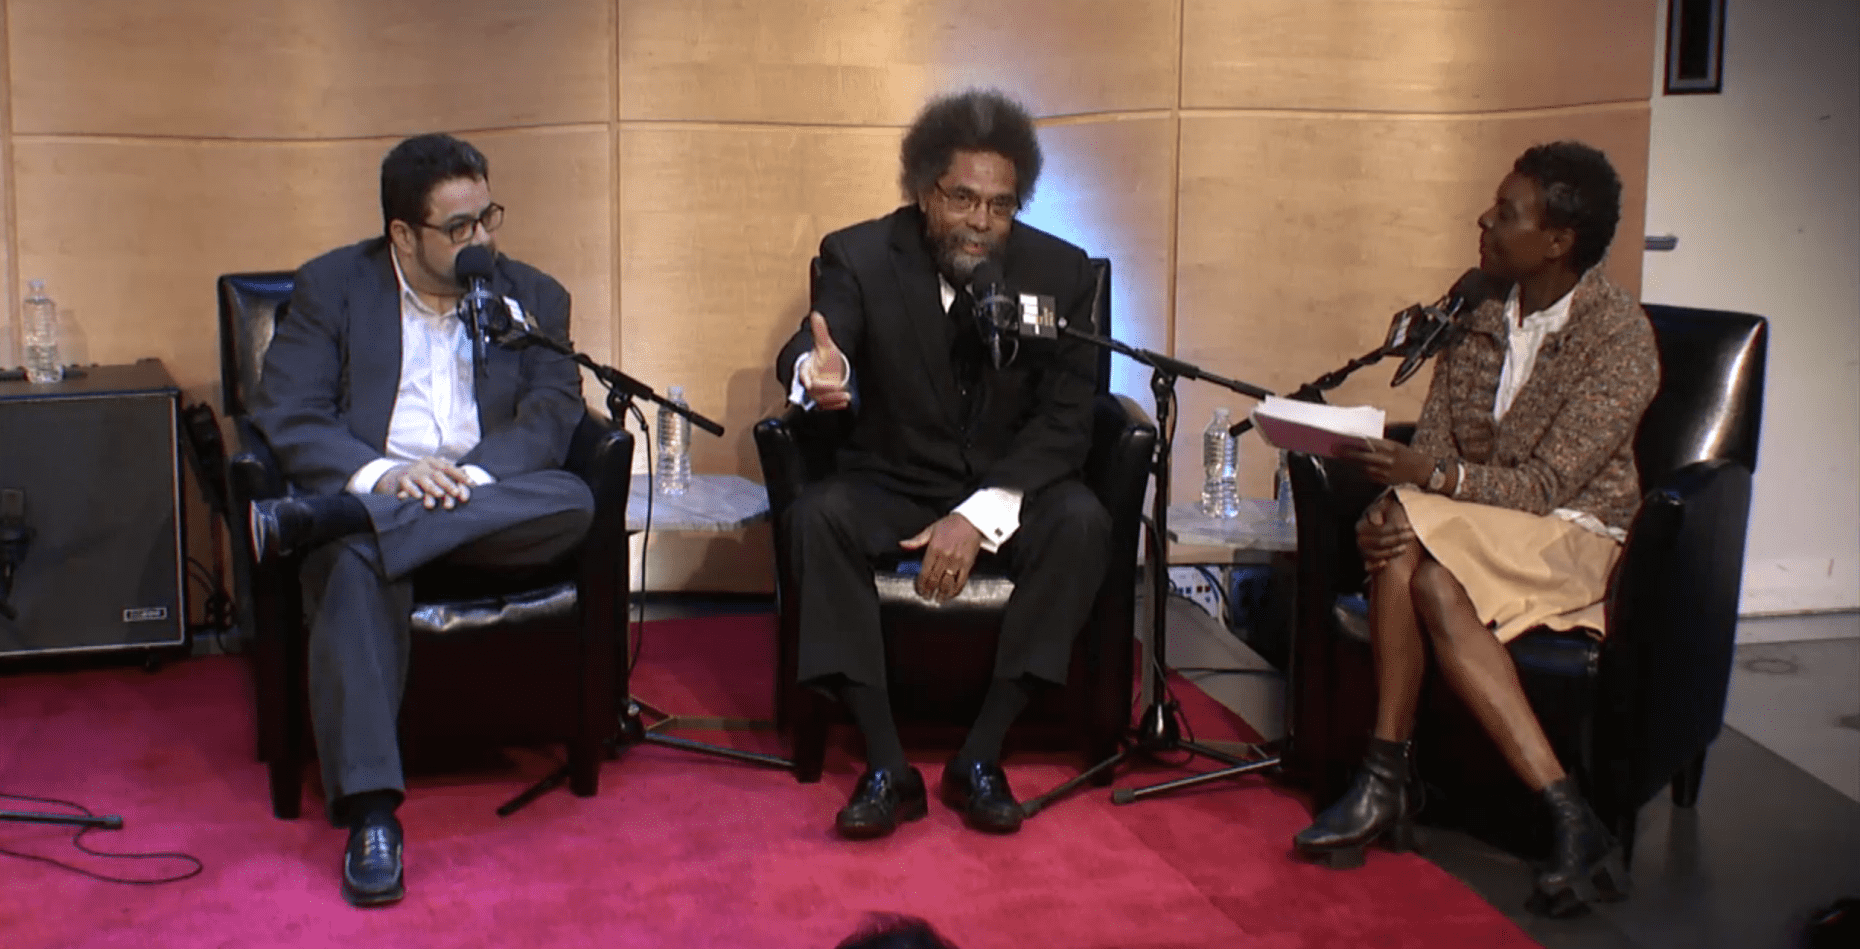 Apollo Theater Presents A Conversation on Jazz and Spirit with Arturo O’Farrill and Cornel West